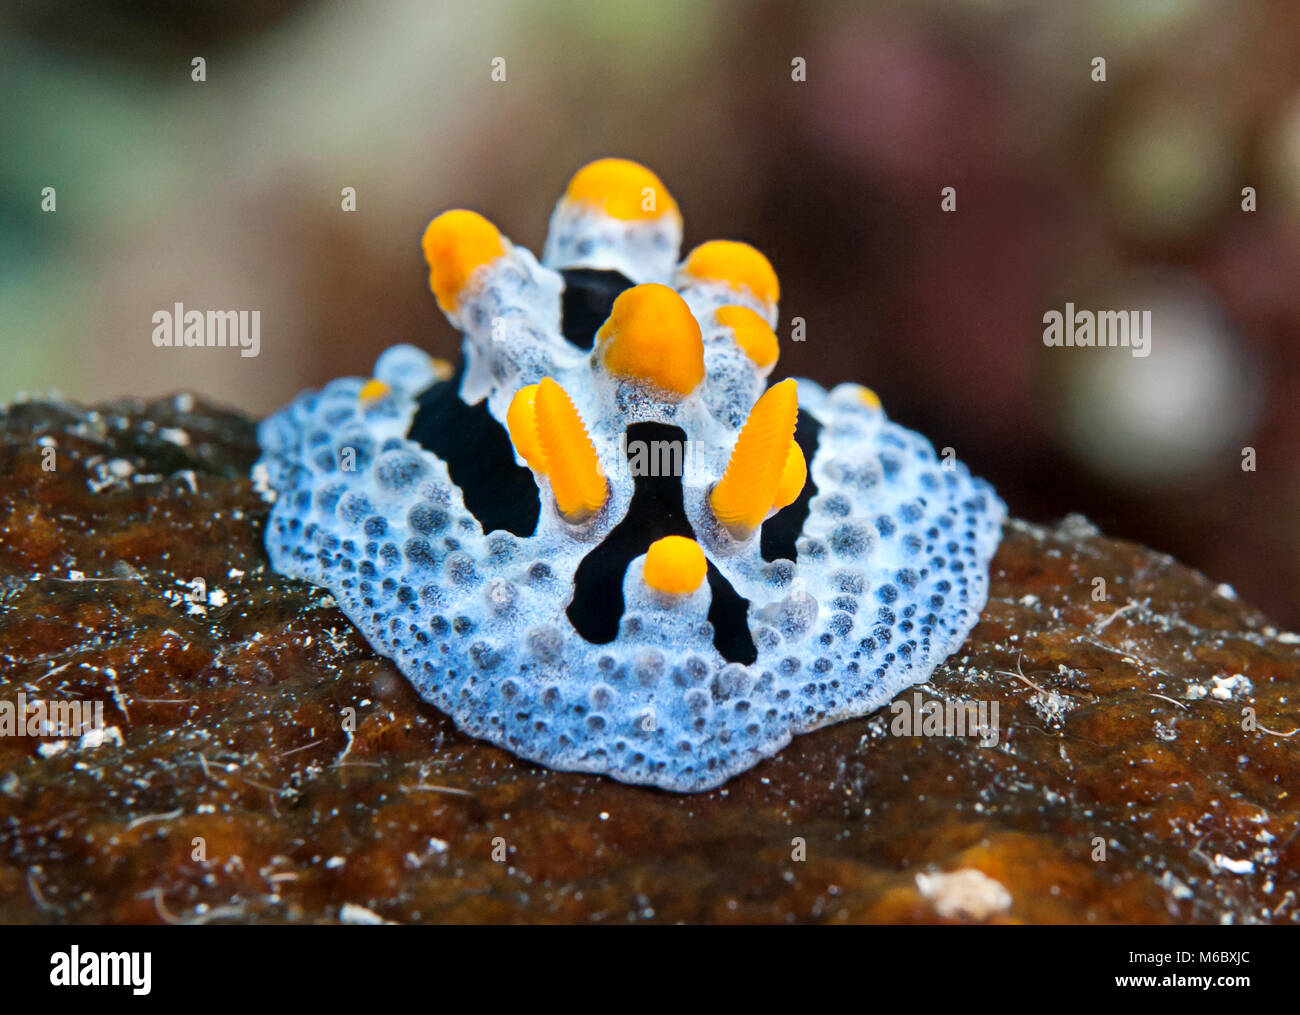 Celestial phyllidia ( Phyllidia coelestis) nudibranch crawls on coral of Bal Stock Photo